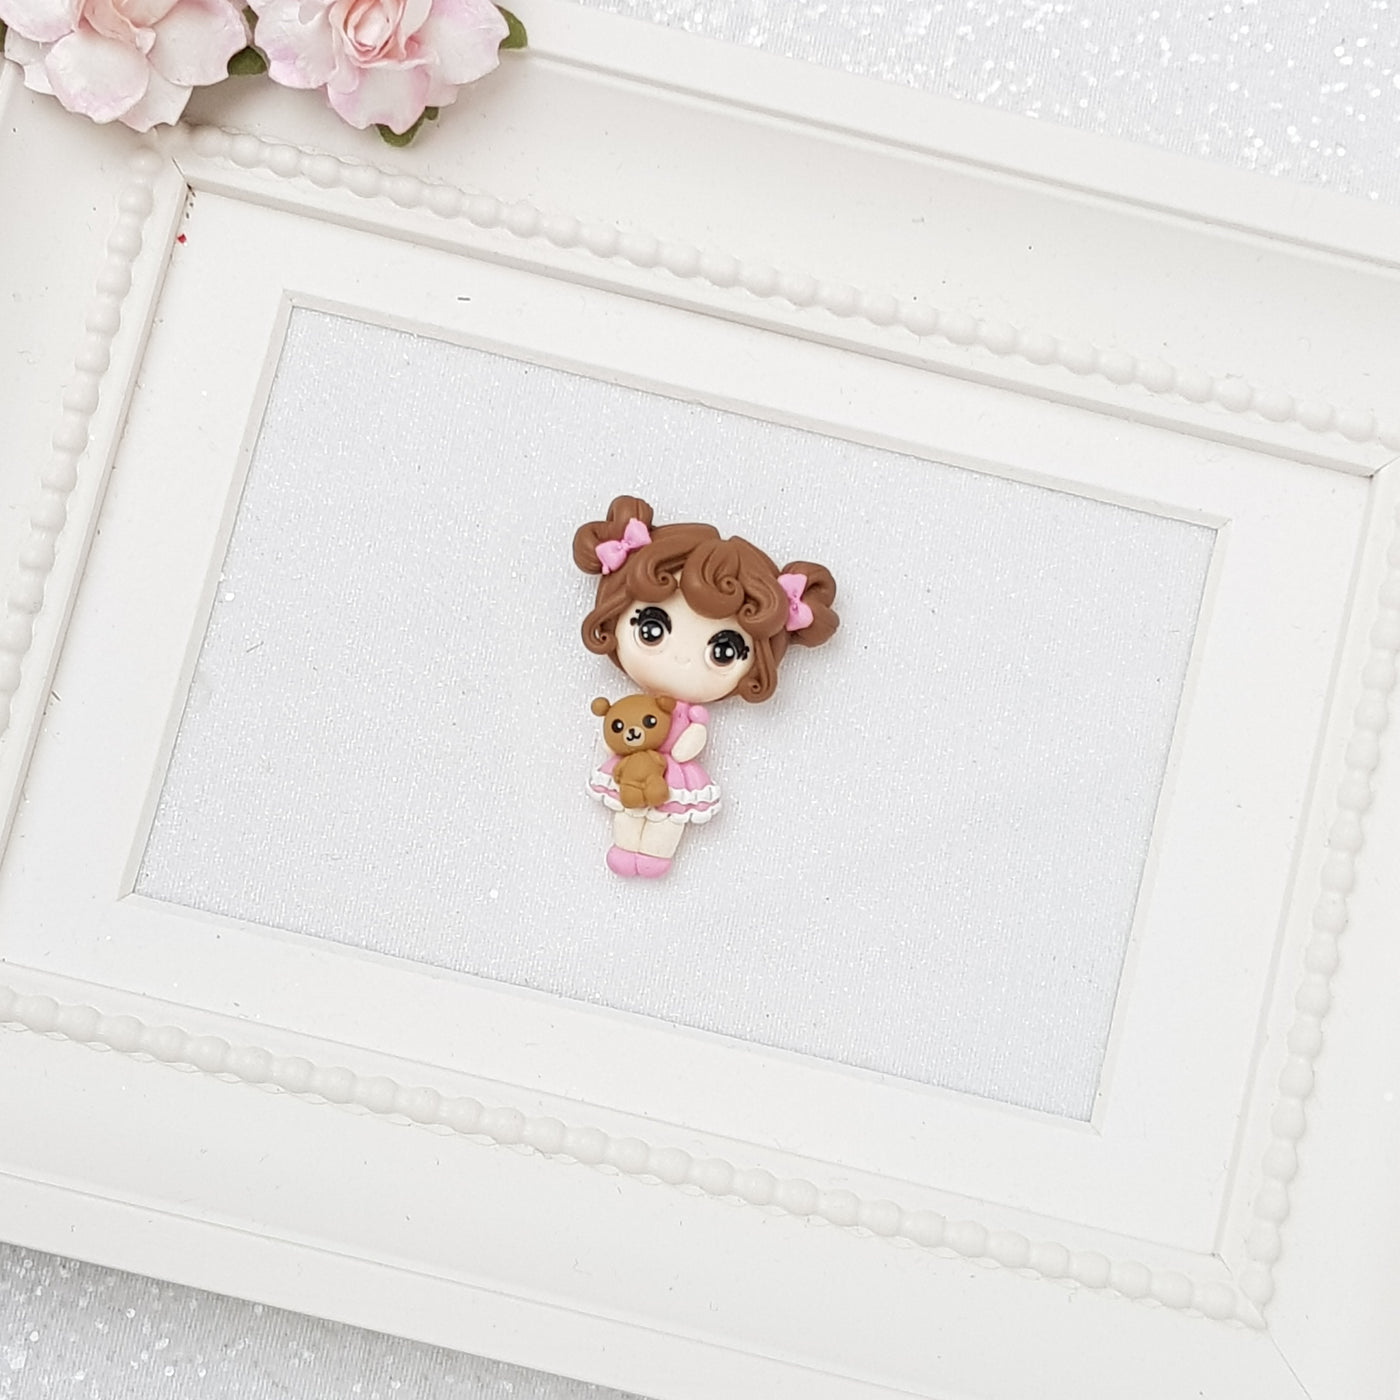 Cute pink girl - Embellishment Clay Bow Centre - Crafty Mood